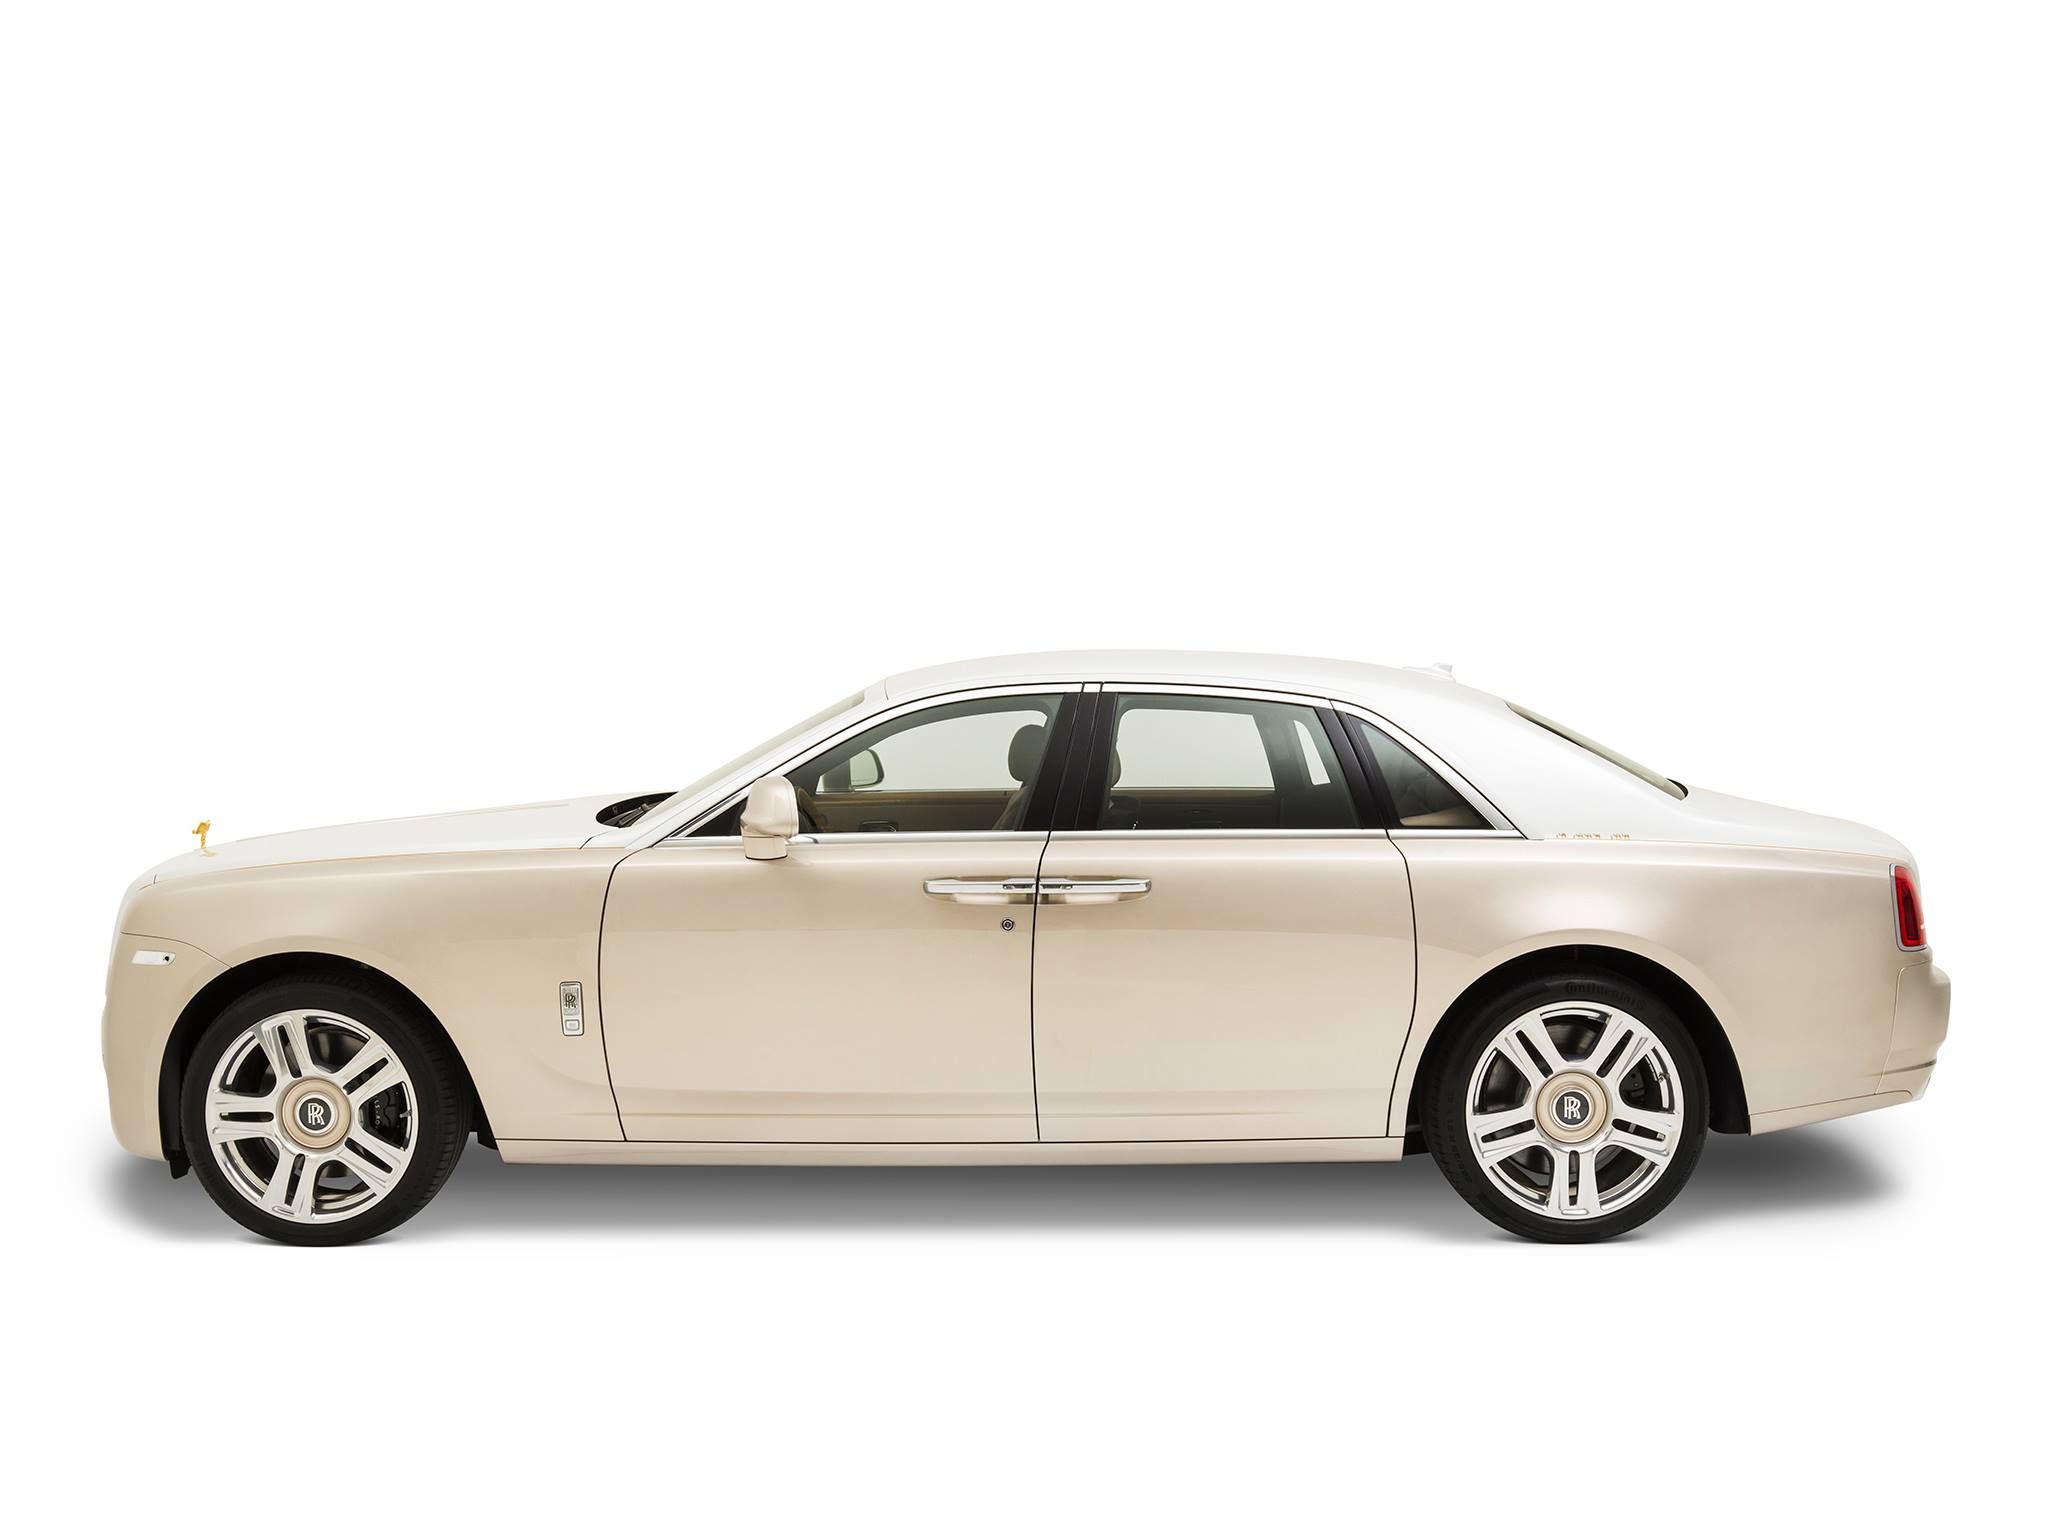 2017 Rolls-Royce Ghost Inspired by Ancient Trading Routes